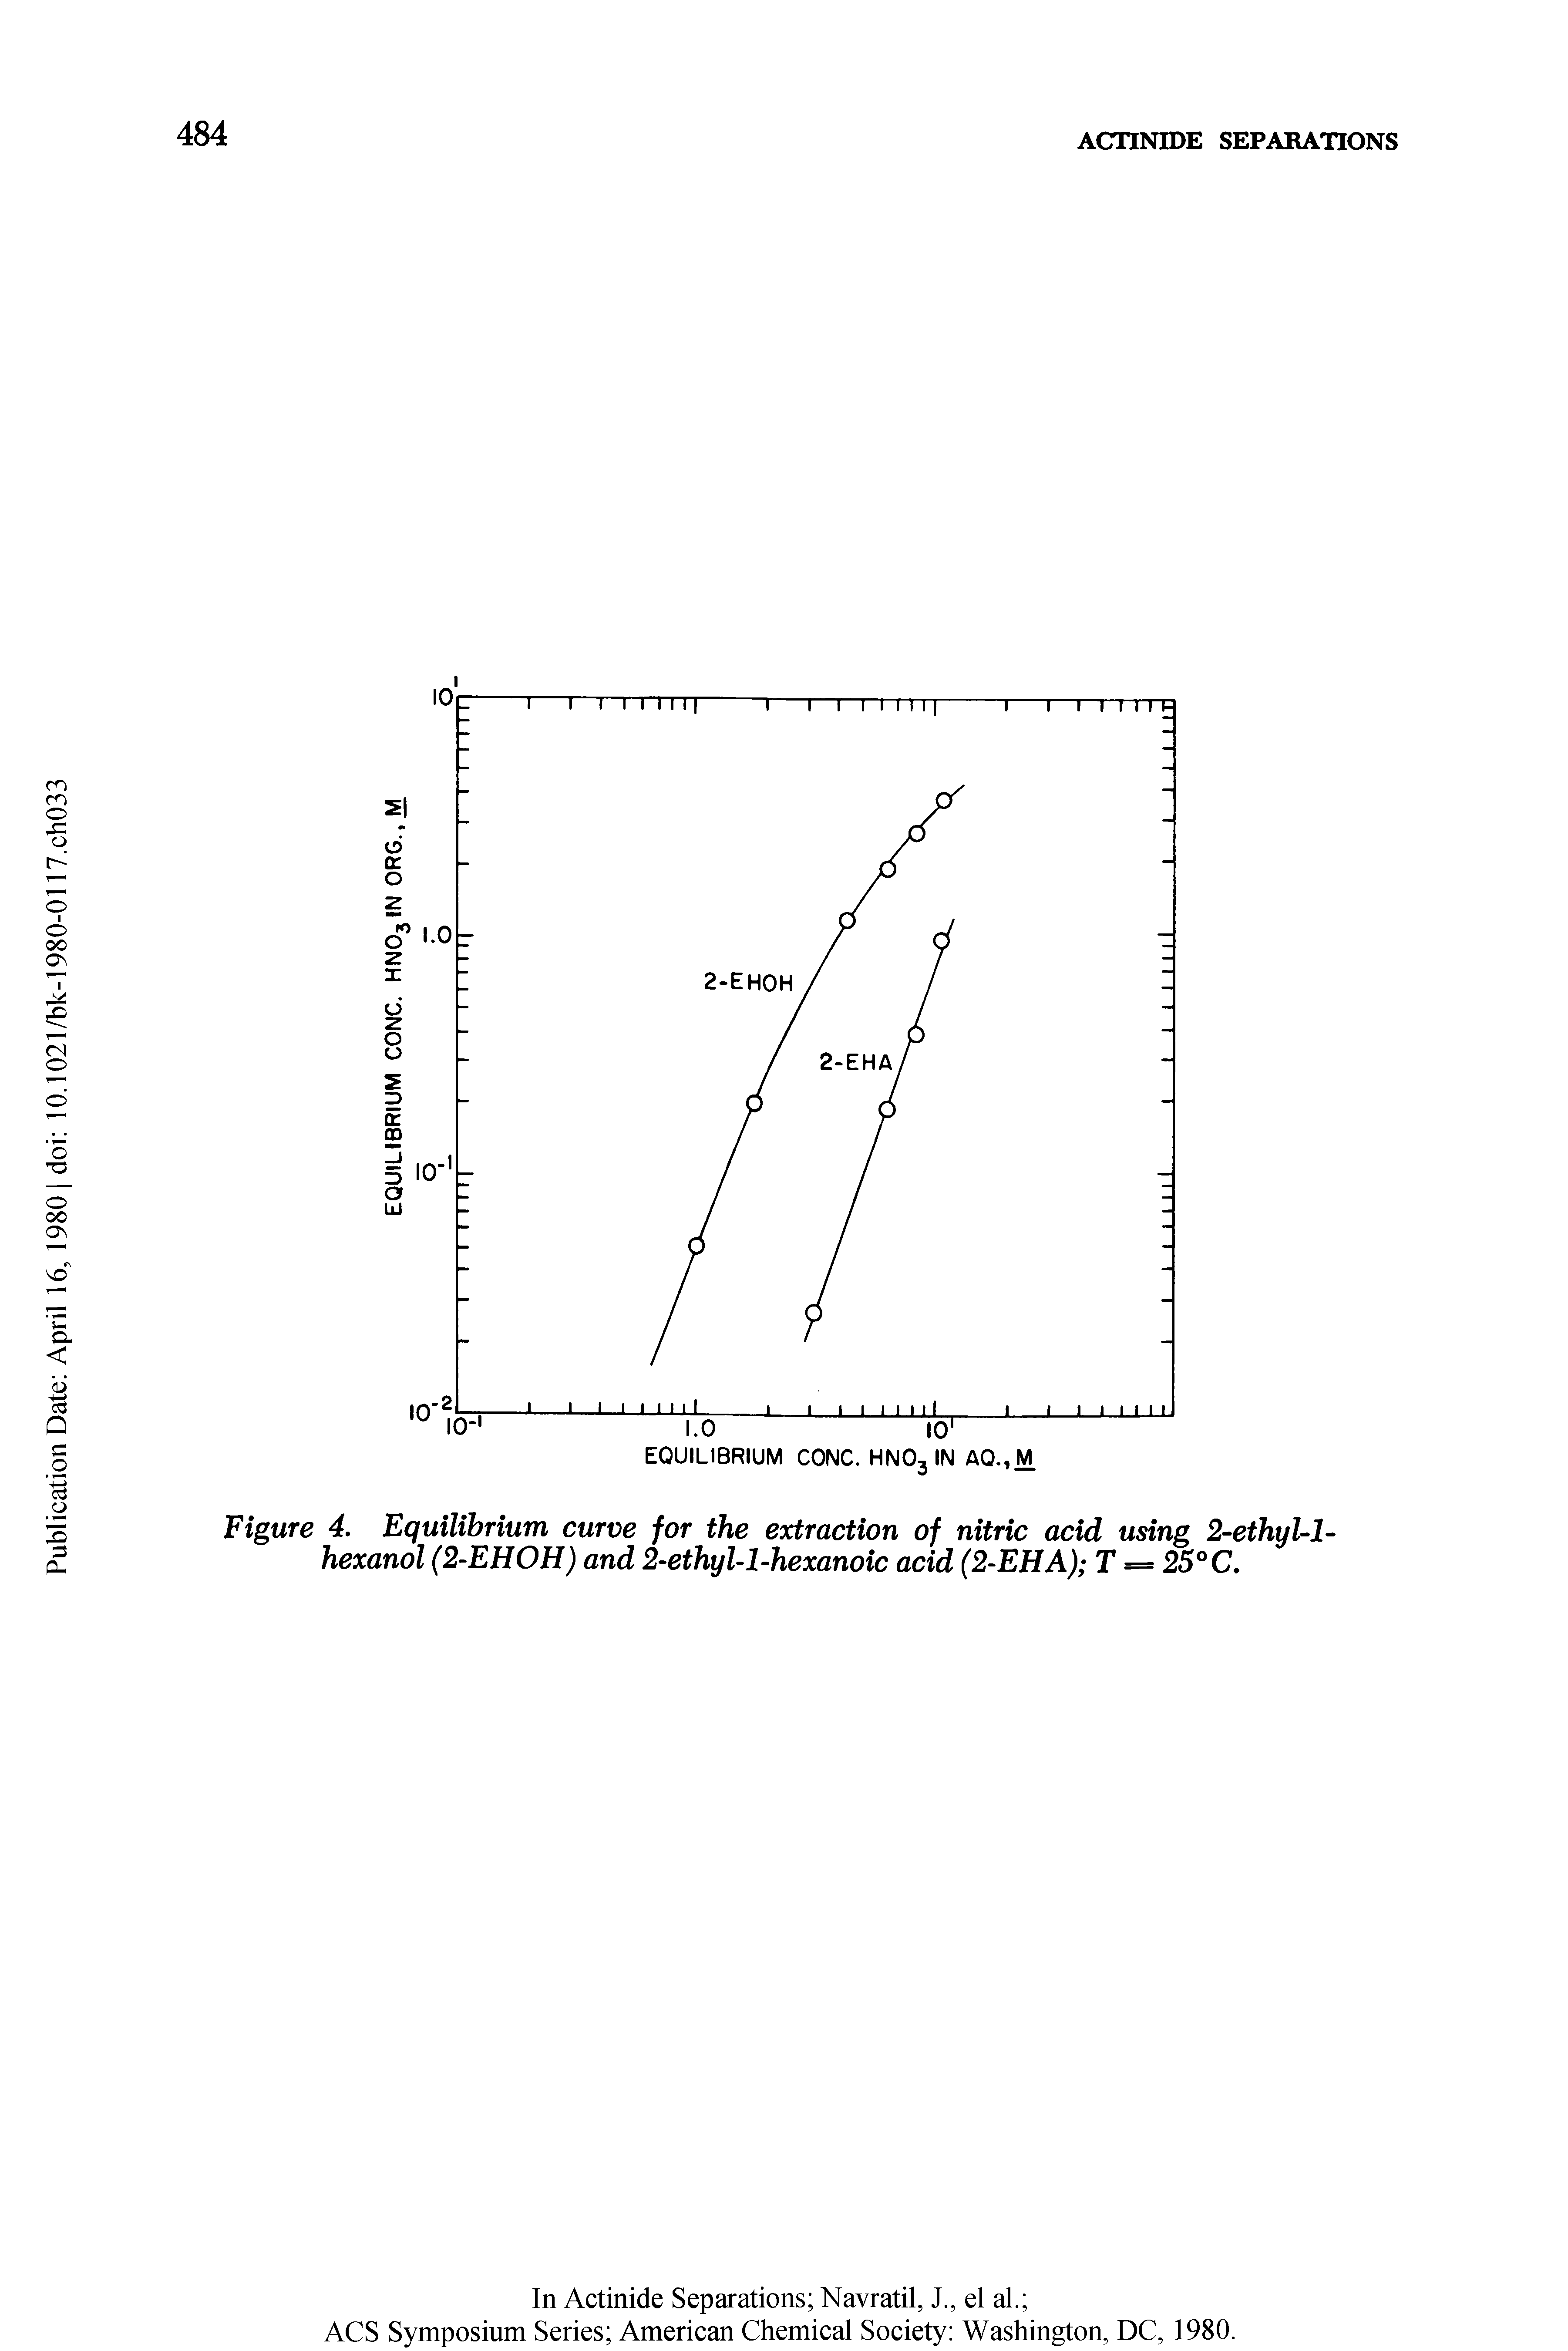 Figure 4. Equilibrium curve for the extraction of nitric acid using 2-ethyl-l-hexanol (2-EHOH) and 2-ethyl-l-hexanoic acid (2-EHA) T = 25°C.